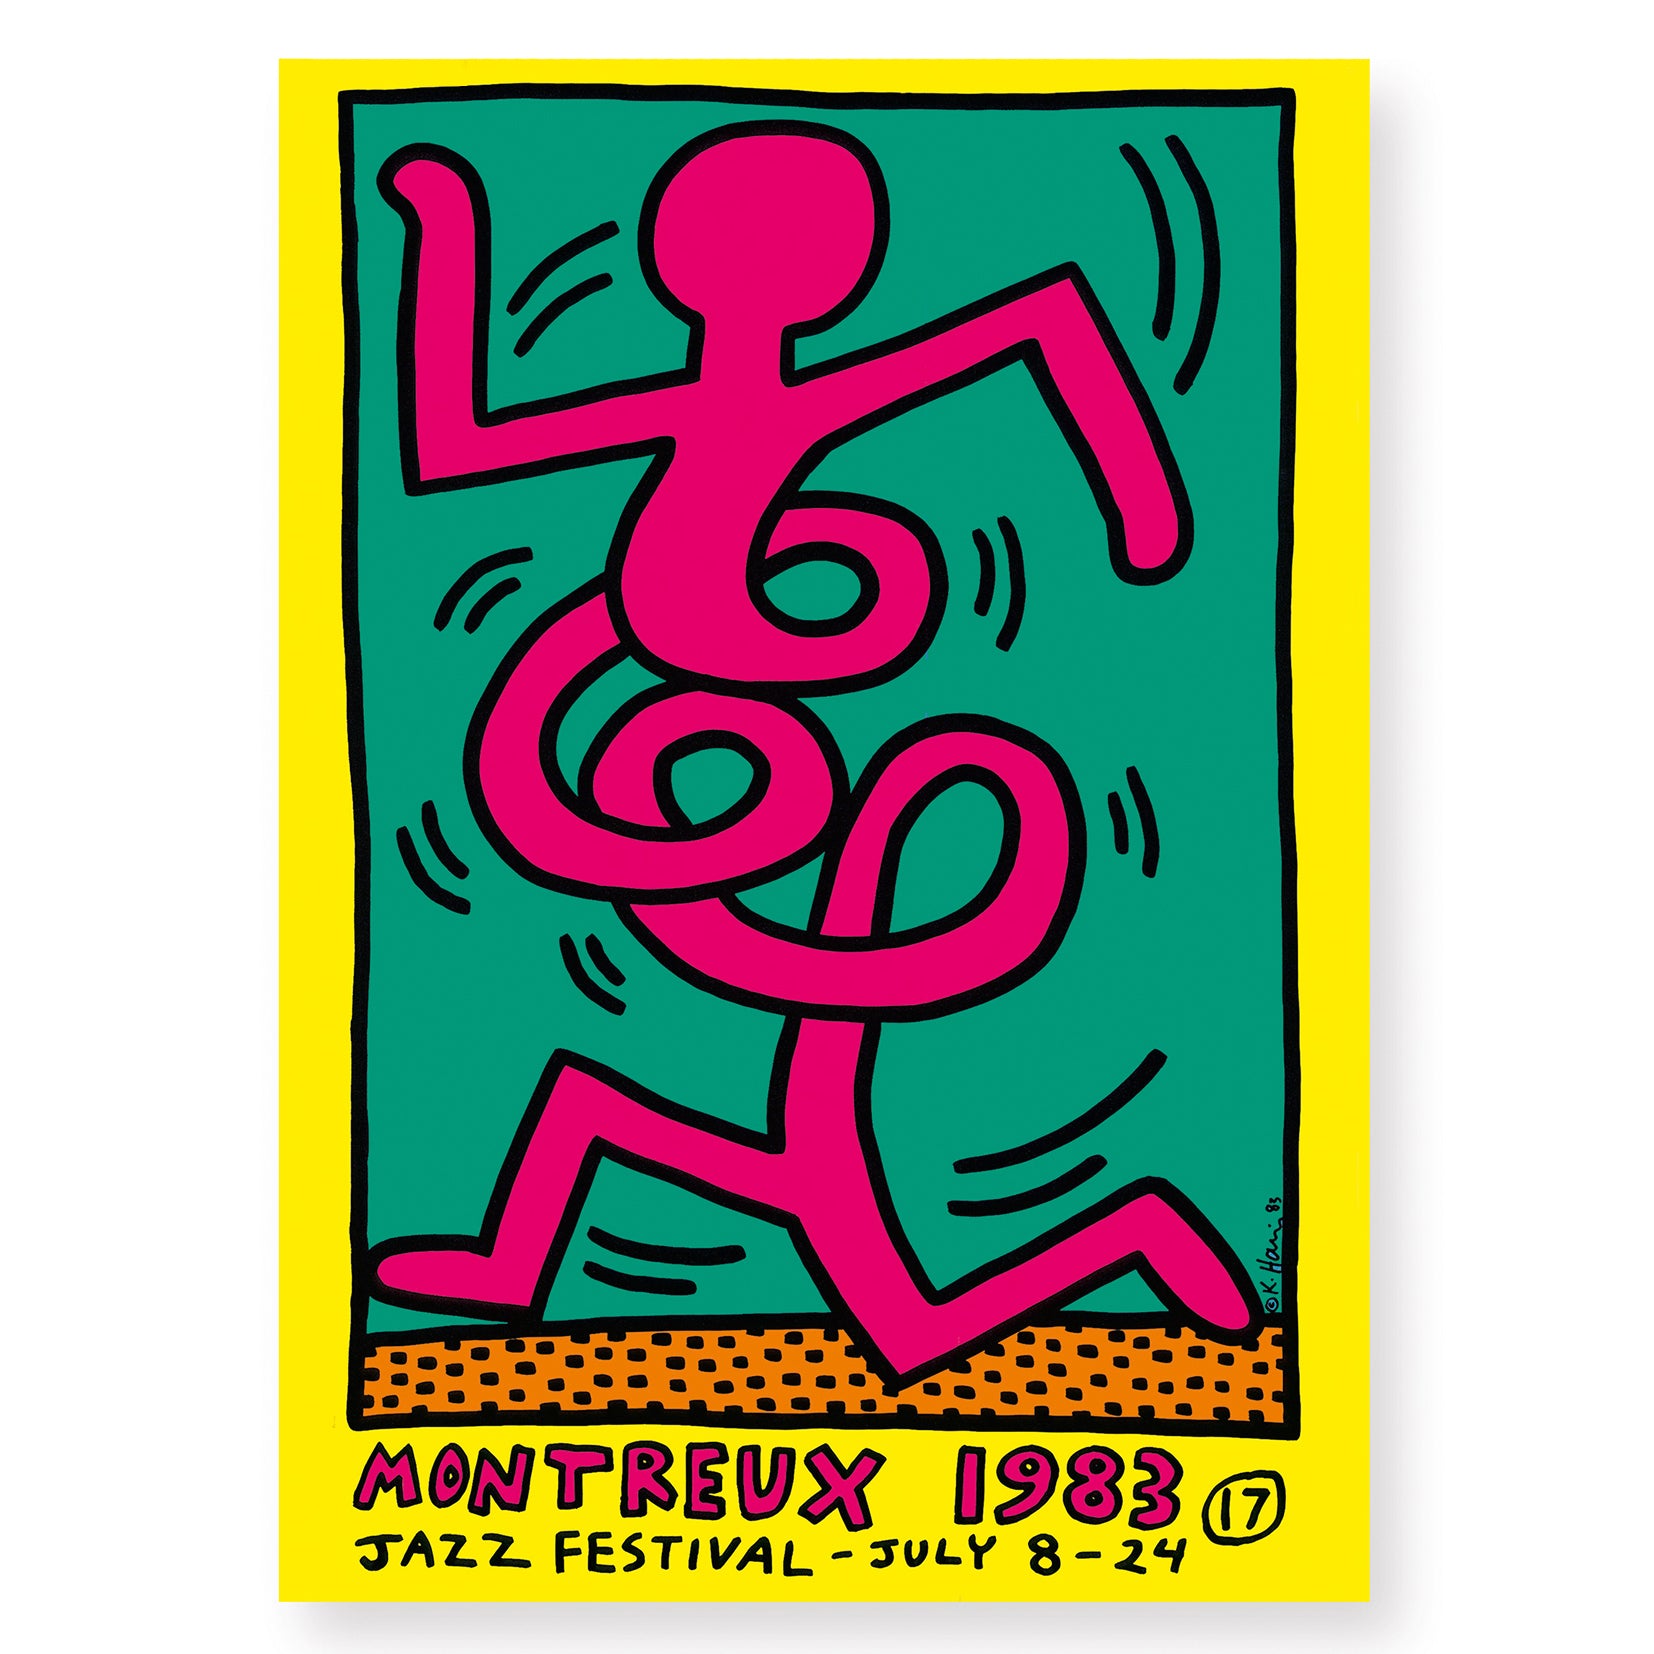 Keith Haring, Montreux Jazz Festival 1983 (Pink) - Smolensky Gallery